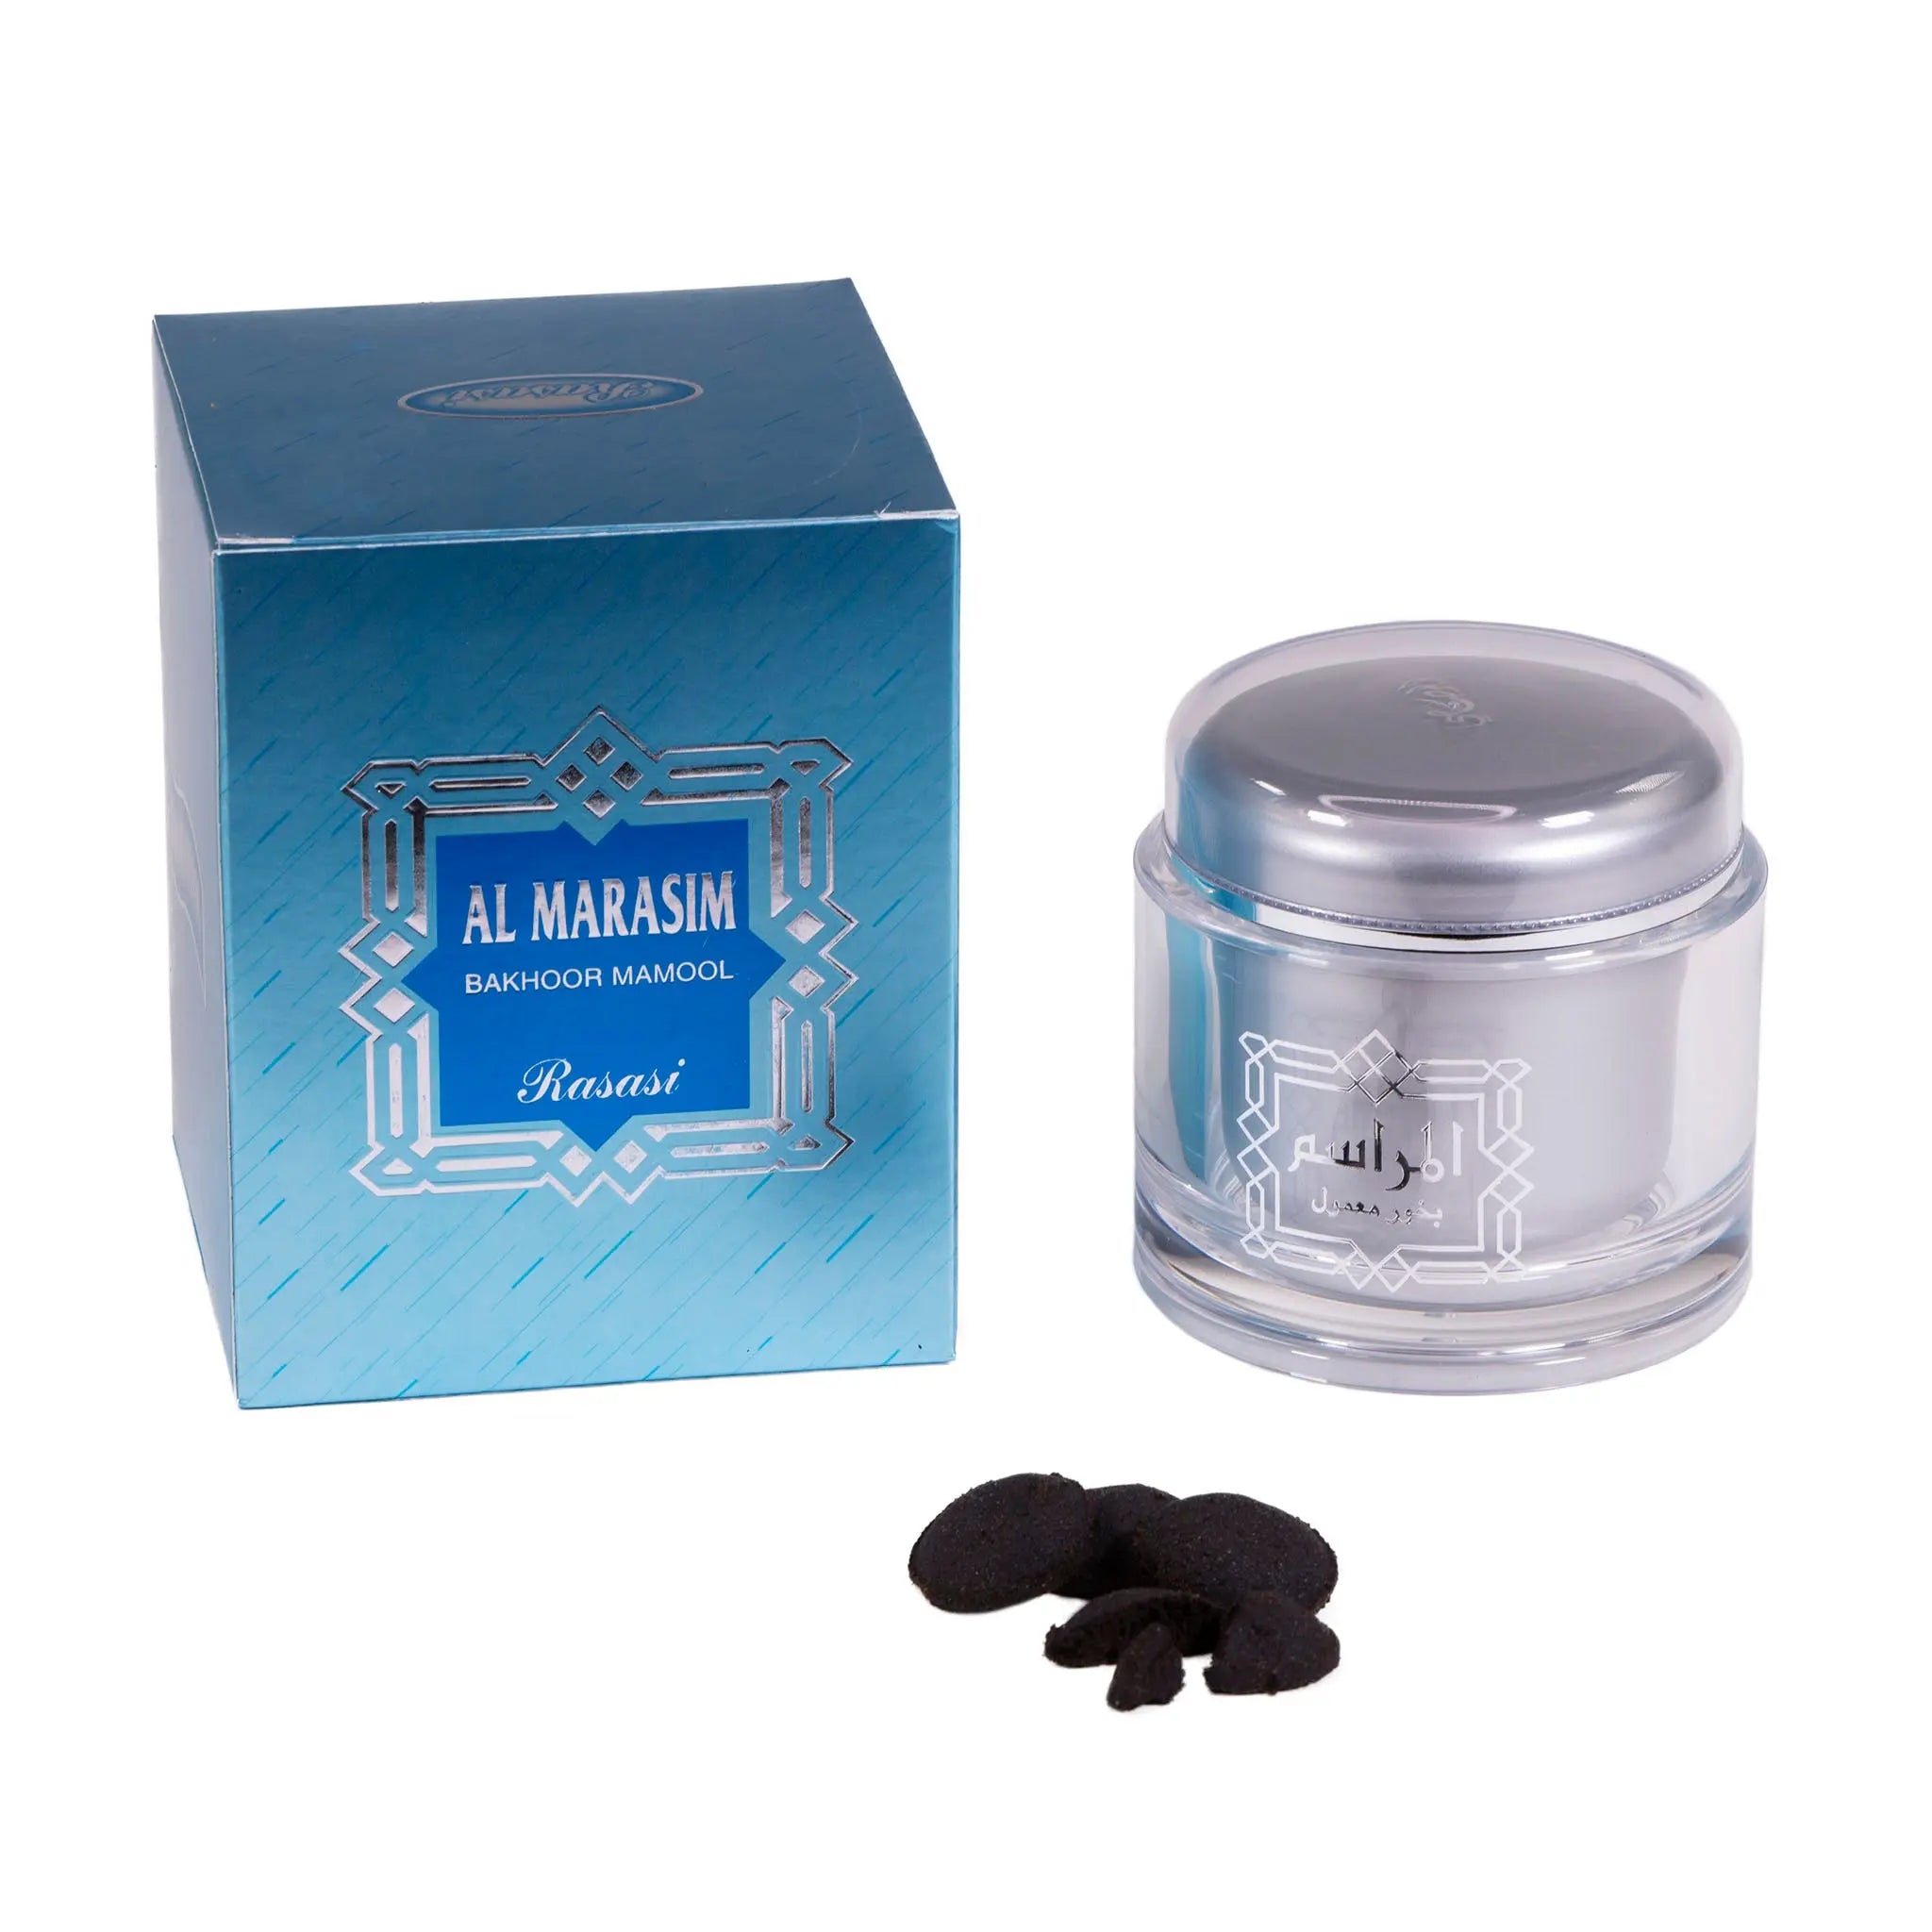 The image shows a product set that includes a jar of bakhoor incense, several pieces of the solid incense outside the jar, and the product's packaging box. The jar is made of clear glass with a silver lid and features Arabic and English writing that reads "Al Marasim Bakhoor Mamool" by "Rasasi." The packaging box is blue with a similar design and branding. The bakhoor pieces are dark brown and irregularly shaped.